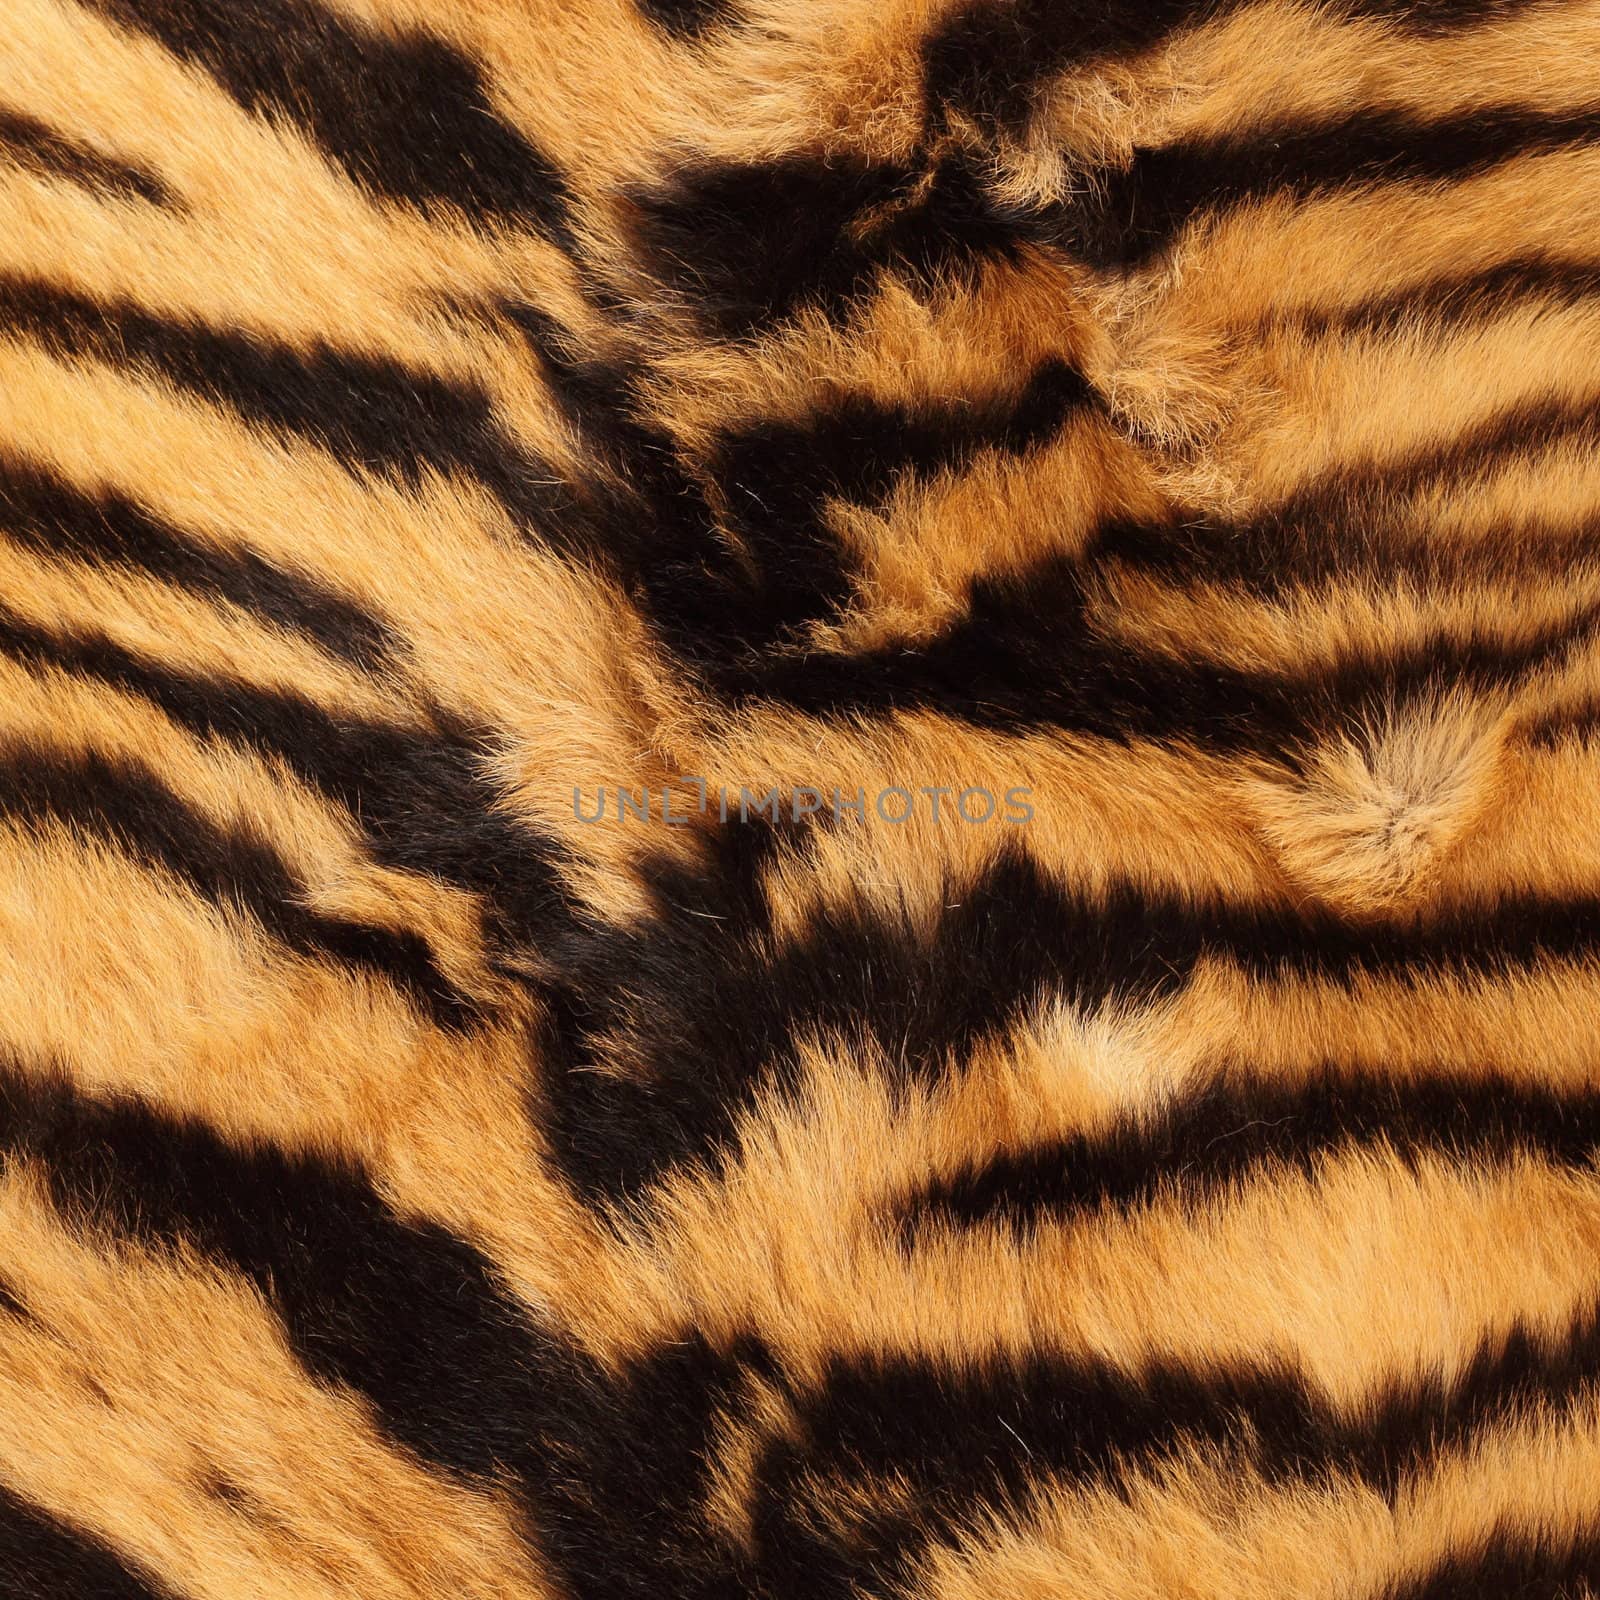 beautiful detail of black stripes on a tiger pelt ( real )